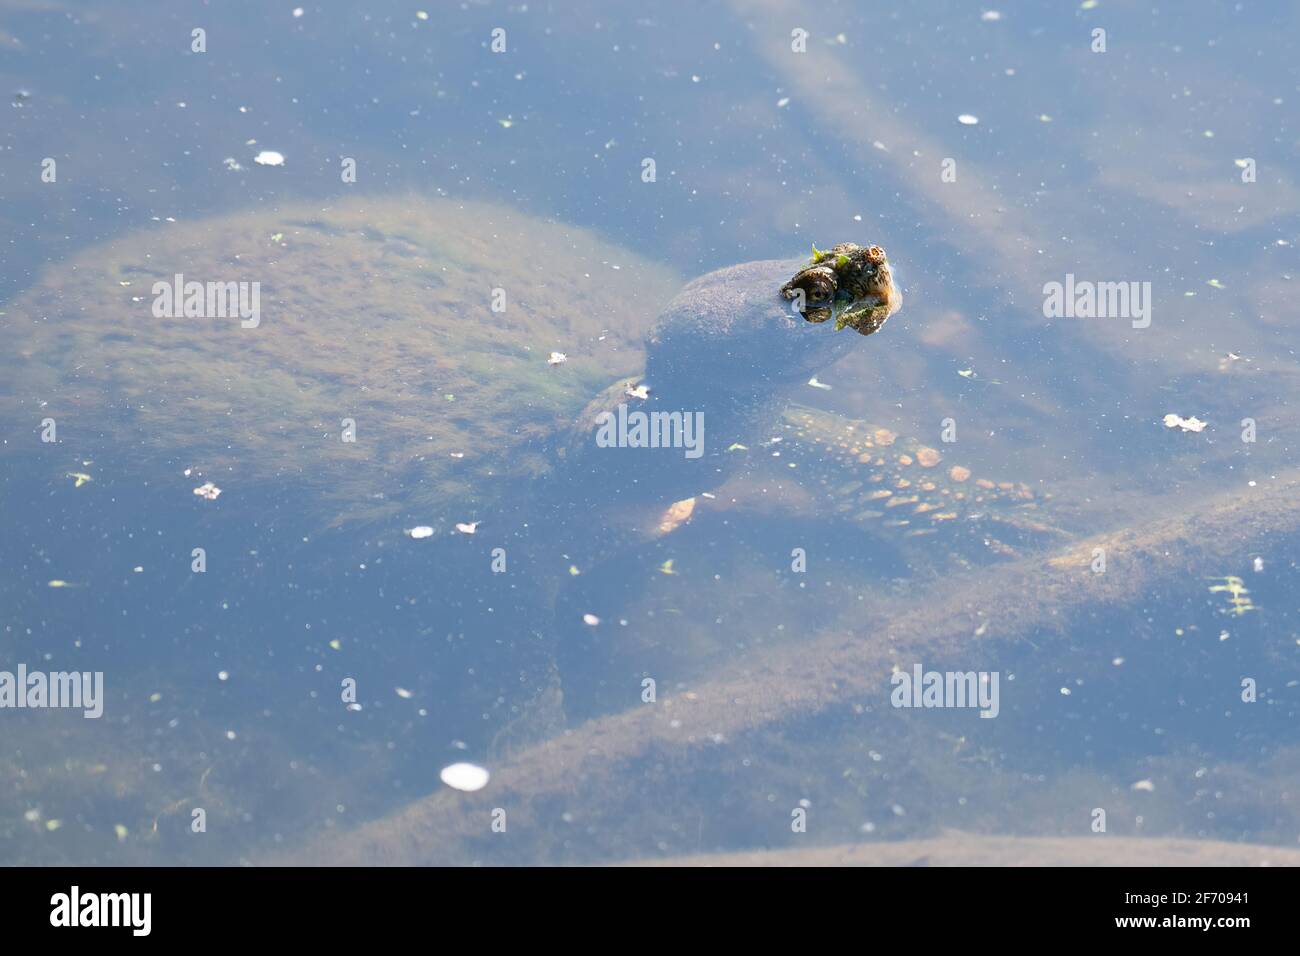 Snapping turtle (chelydra serpentina) underwater with part of its face above the water surface Stock Photo